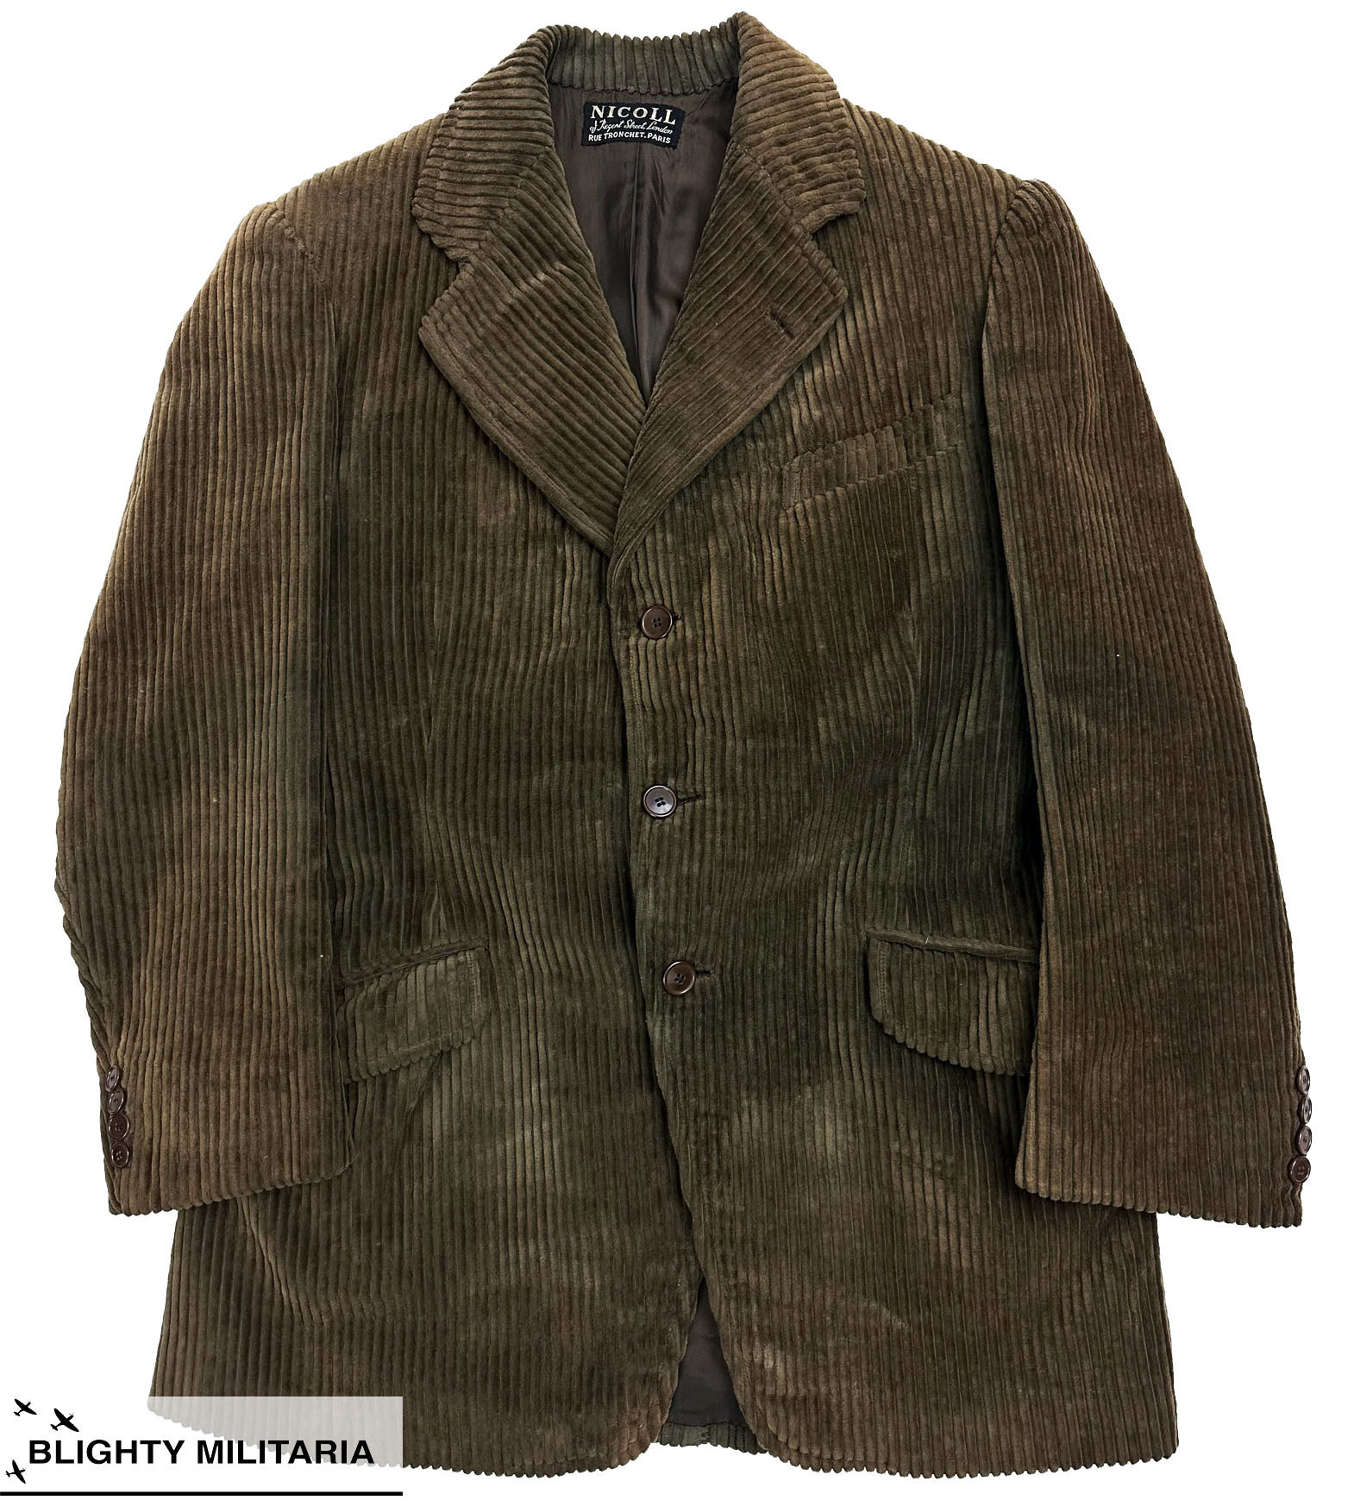 Incredible 1944 Dated French Corduroy Jacket by 'Nicoll'